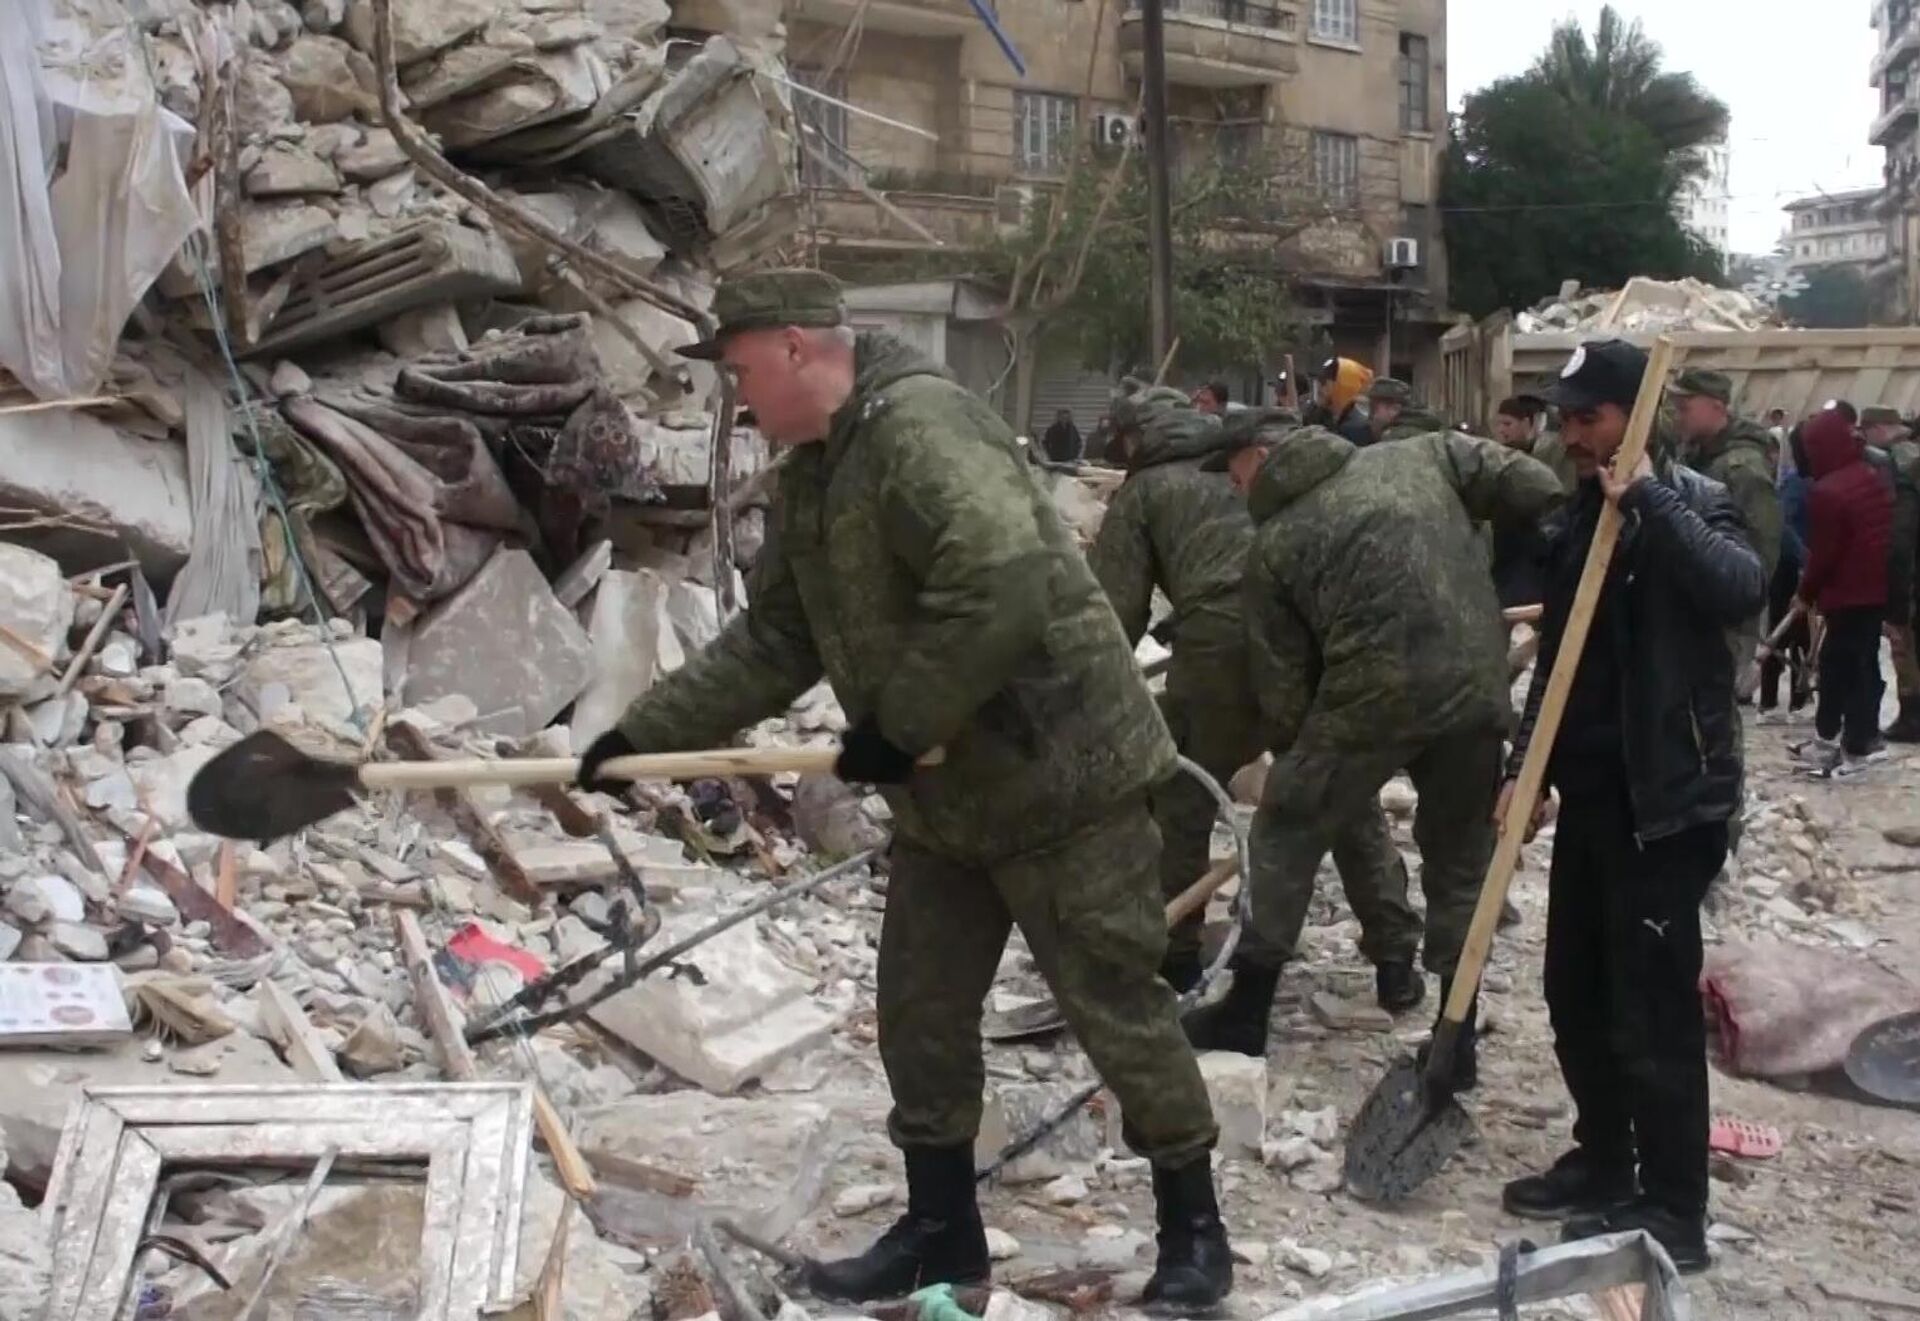 Russian military help eliminate consequences of the earthquake in Syria - Sputnik International, 1920, 14.02.2023